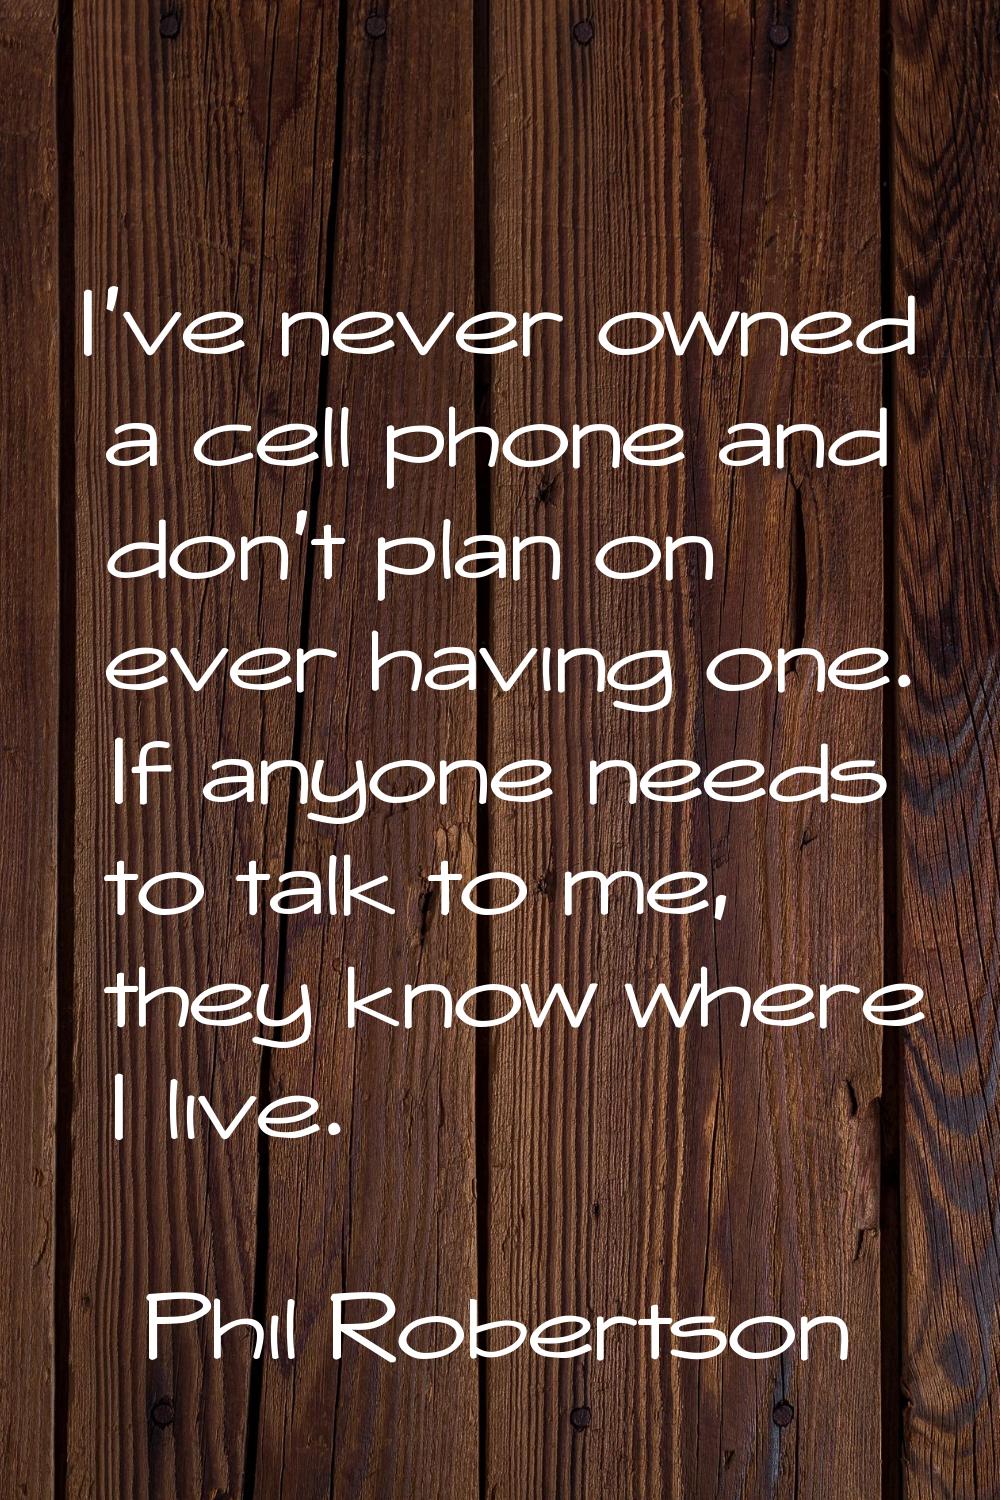 I've never owned a cell phone and don't plan on ever having one. If anyone needs to talk to me, the